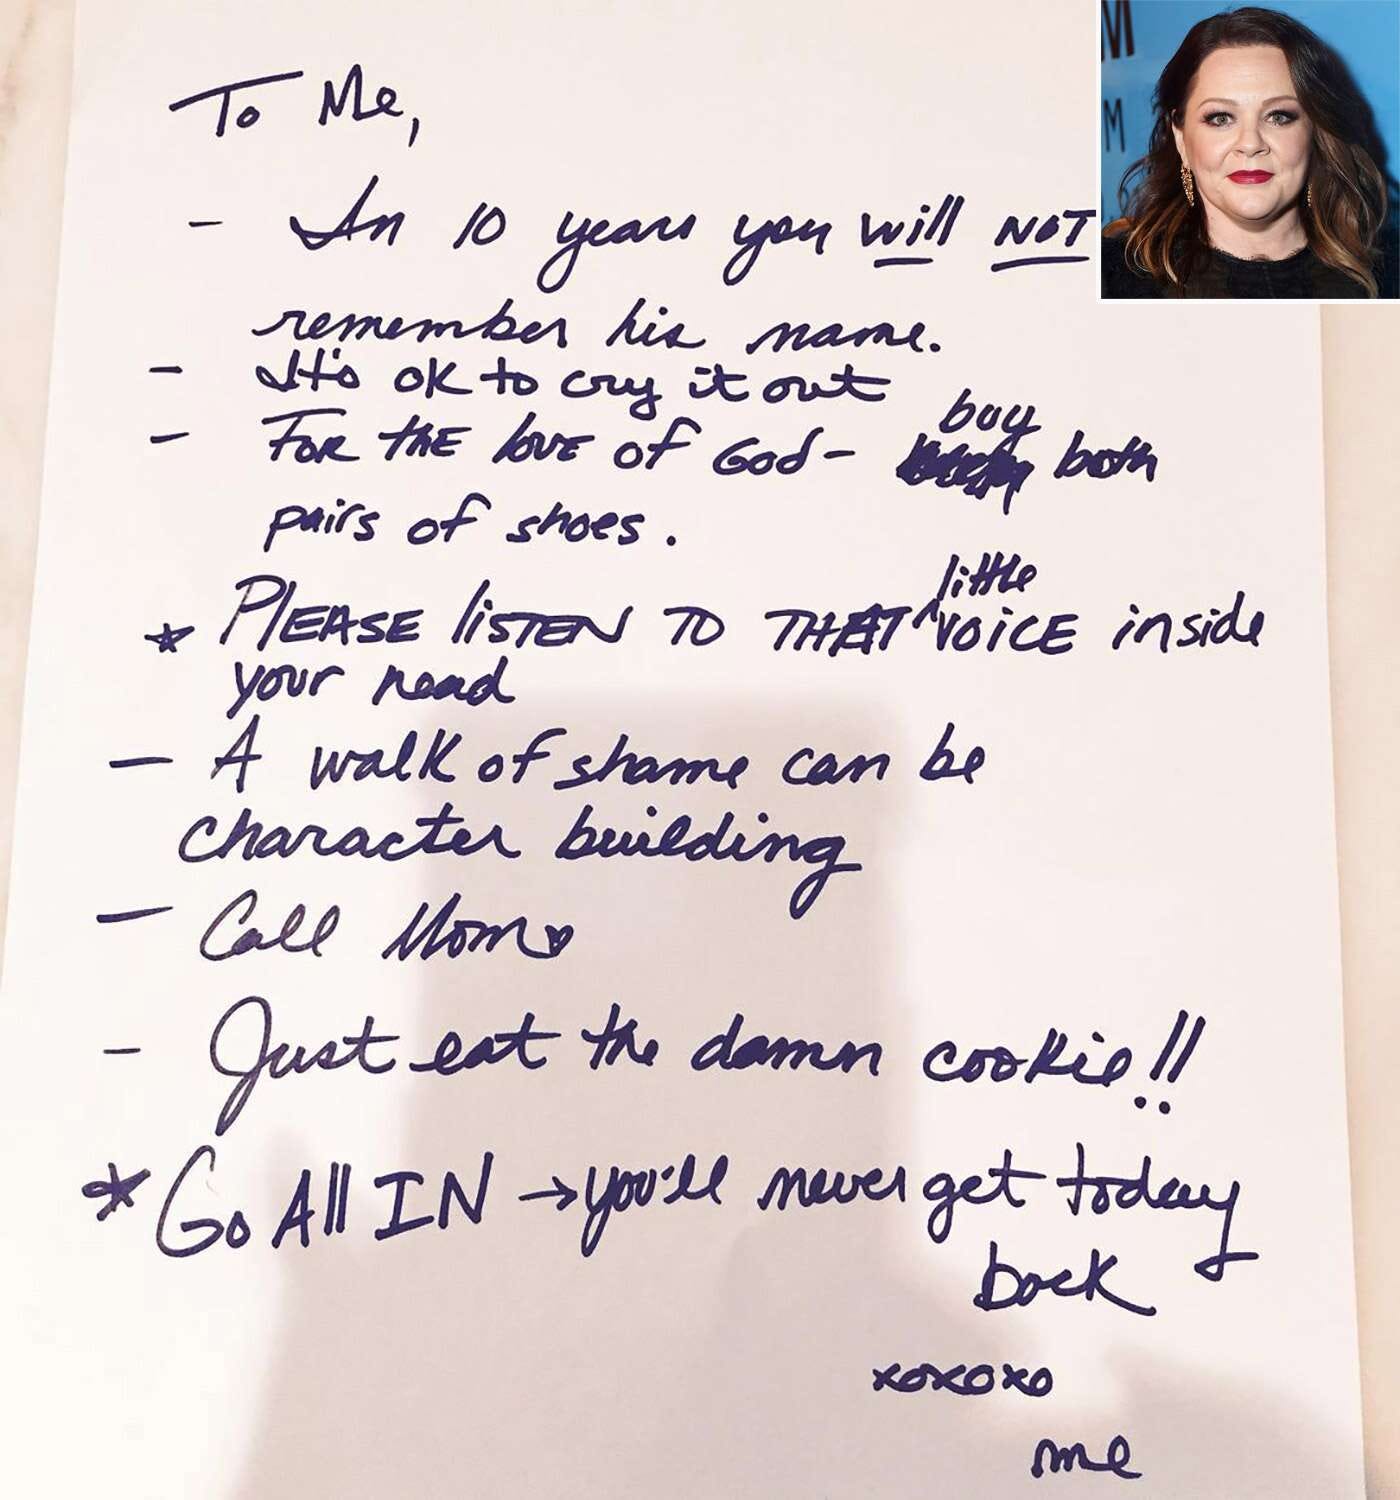 Melissa McCarthy Shares Empowering Note She Wrote to Herself Years Ago |  PEOPLE.com